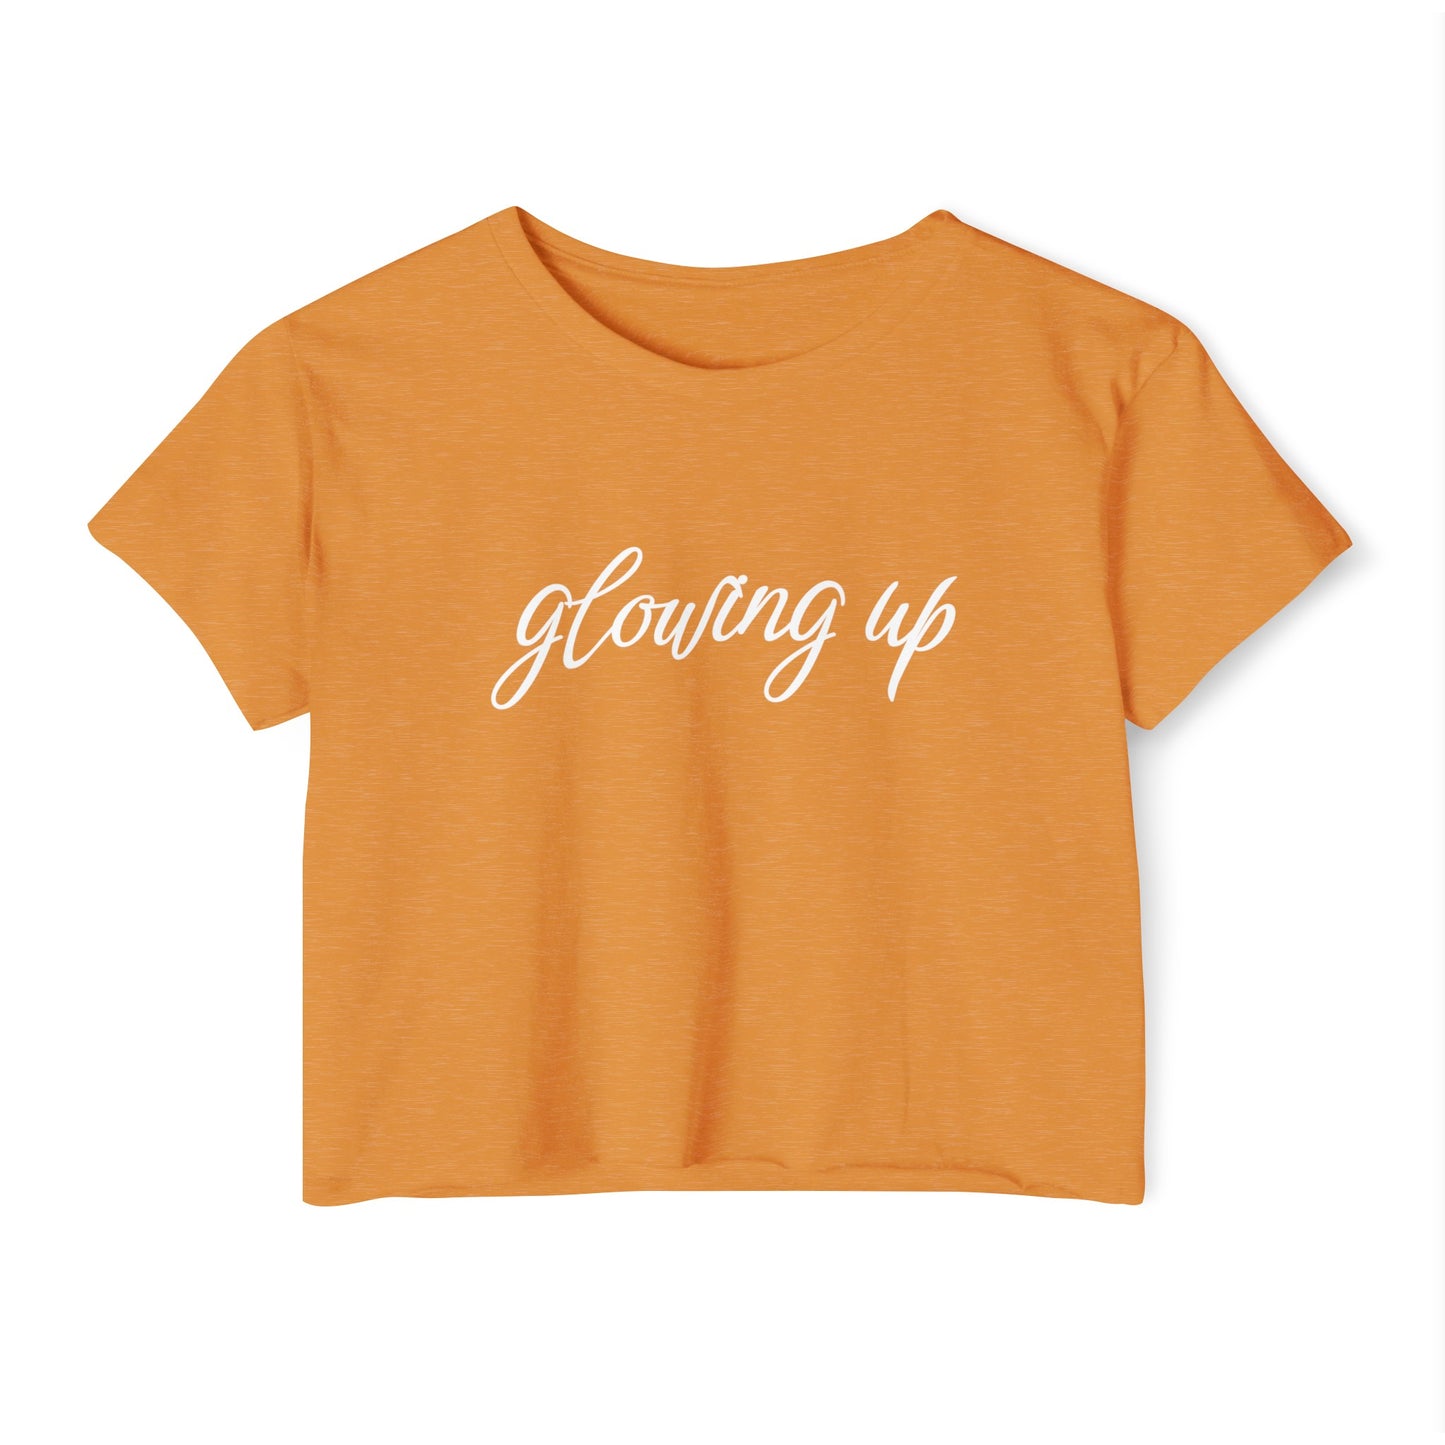 "glowing up" Cropped Tee